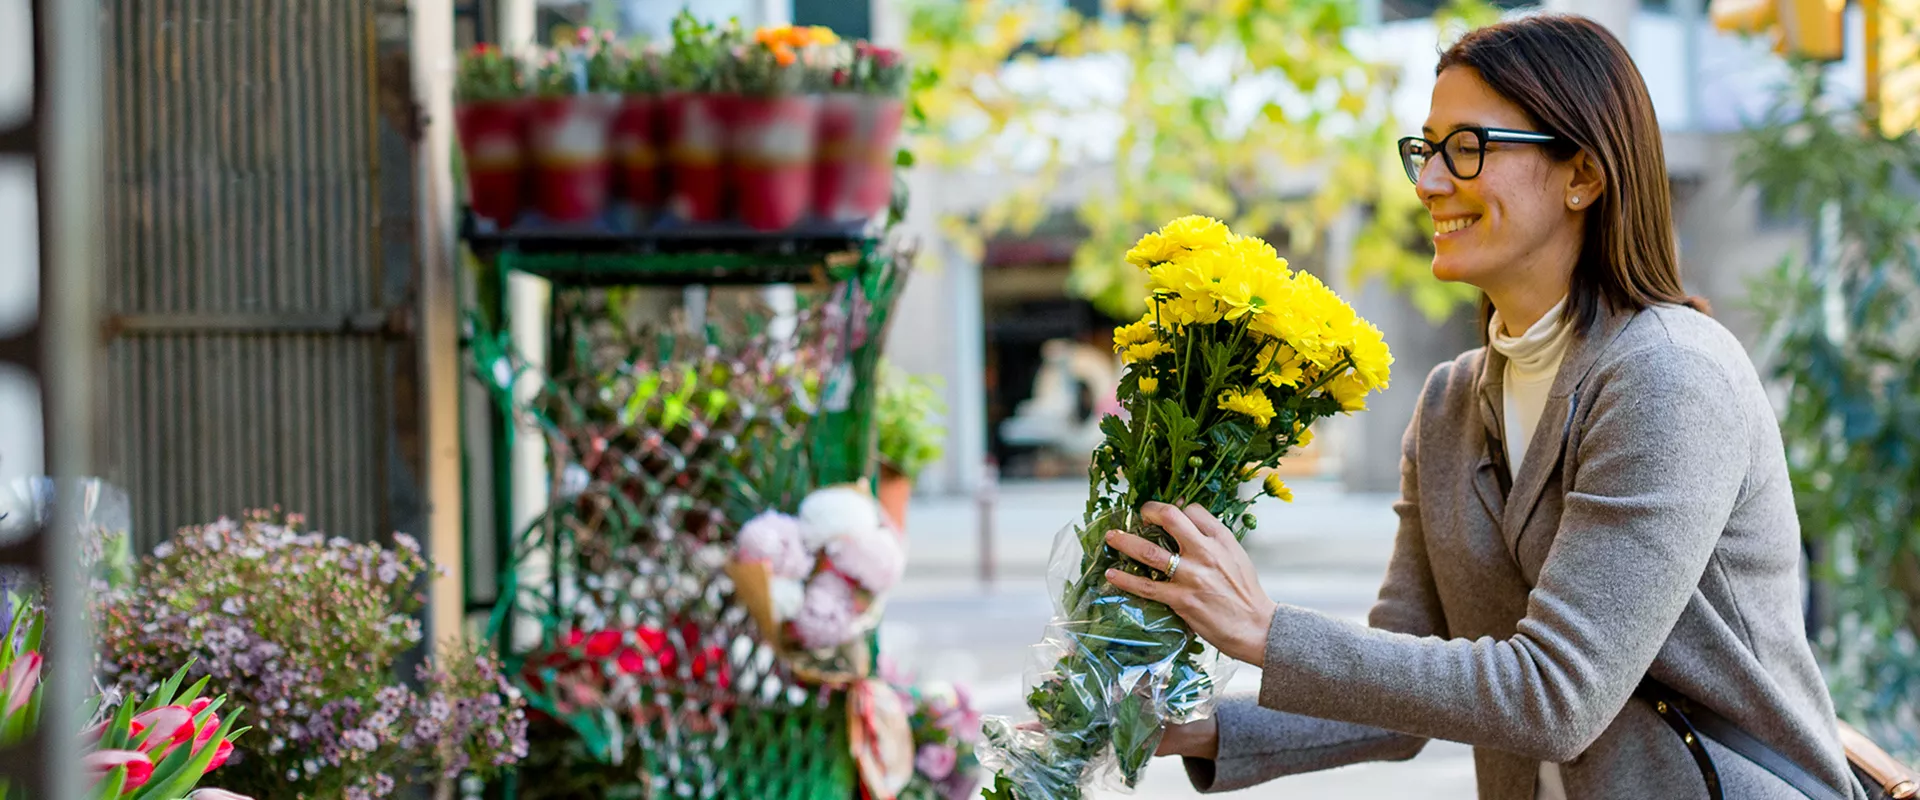 A woman holding a bunch of flowers outside a flowershop